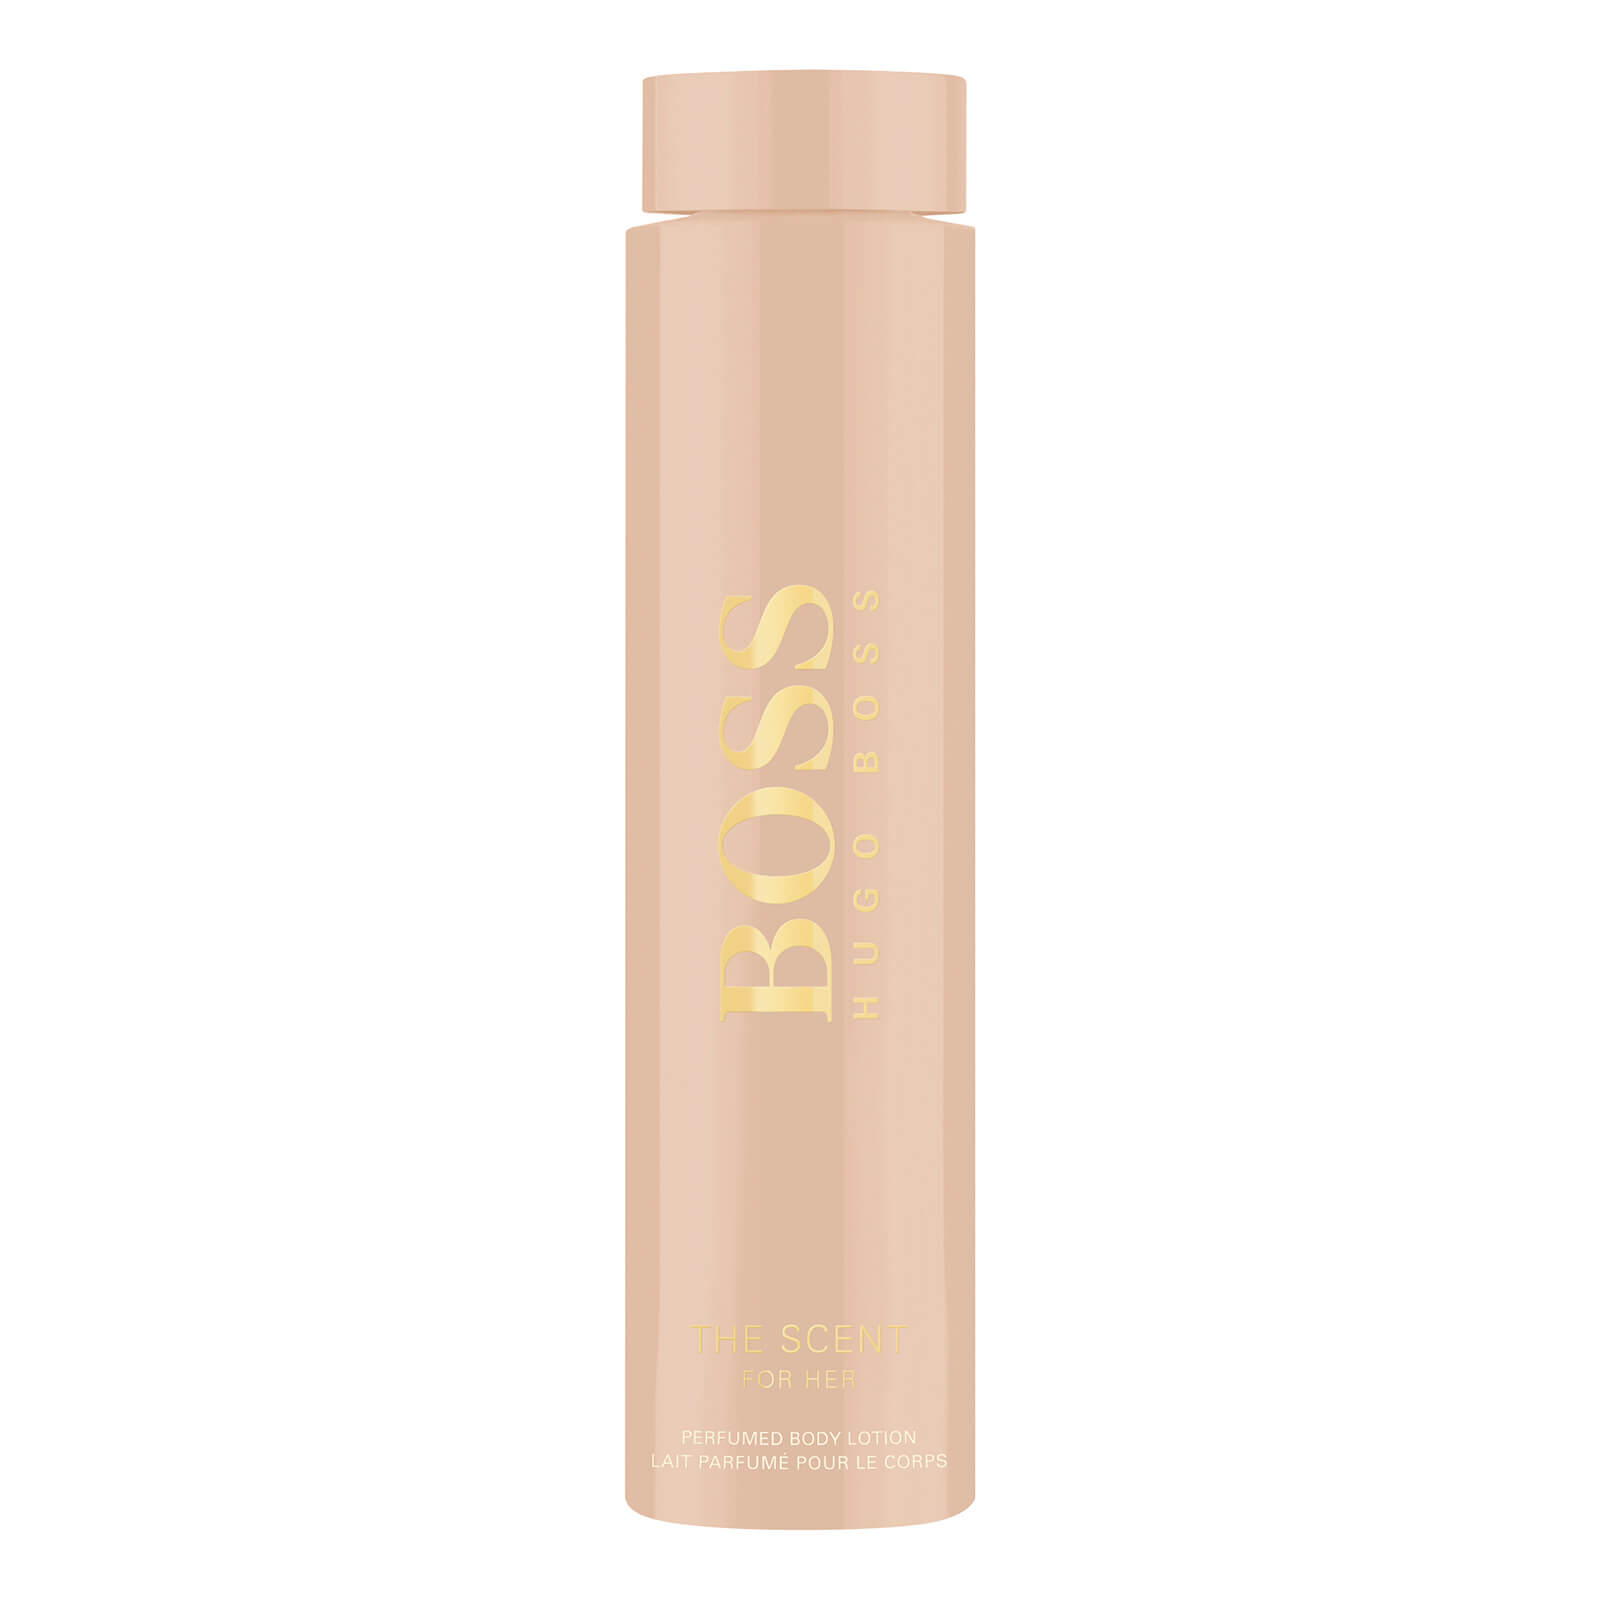 Hugo Boss The Scent for Her Body Lotion 